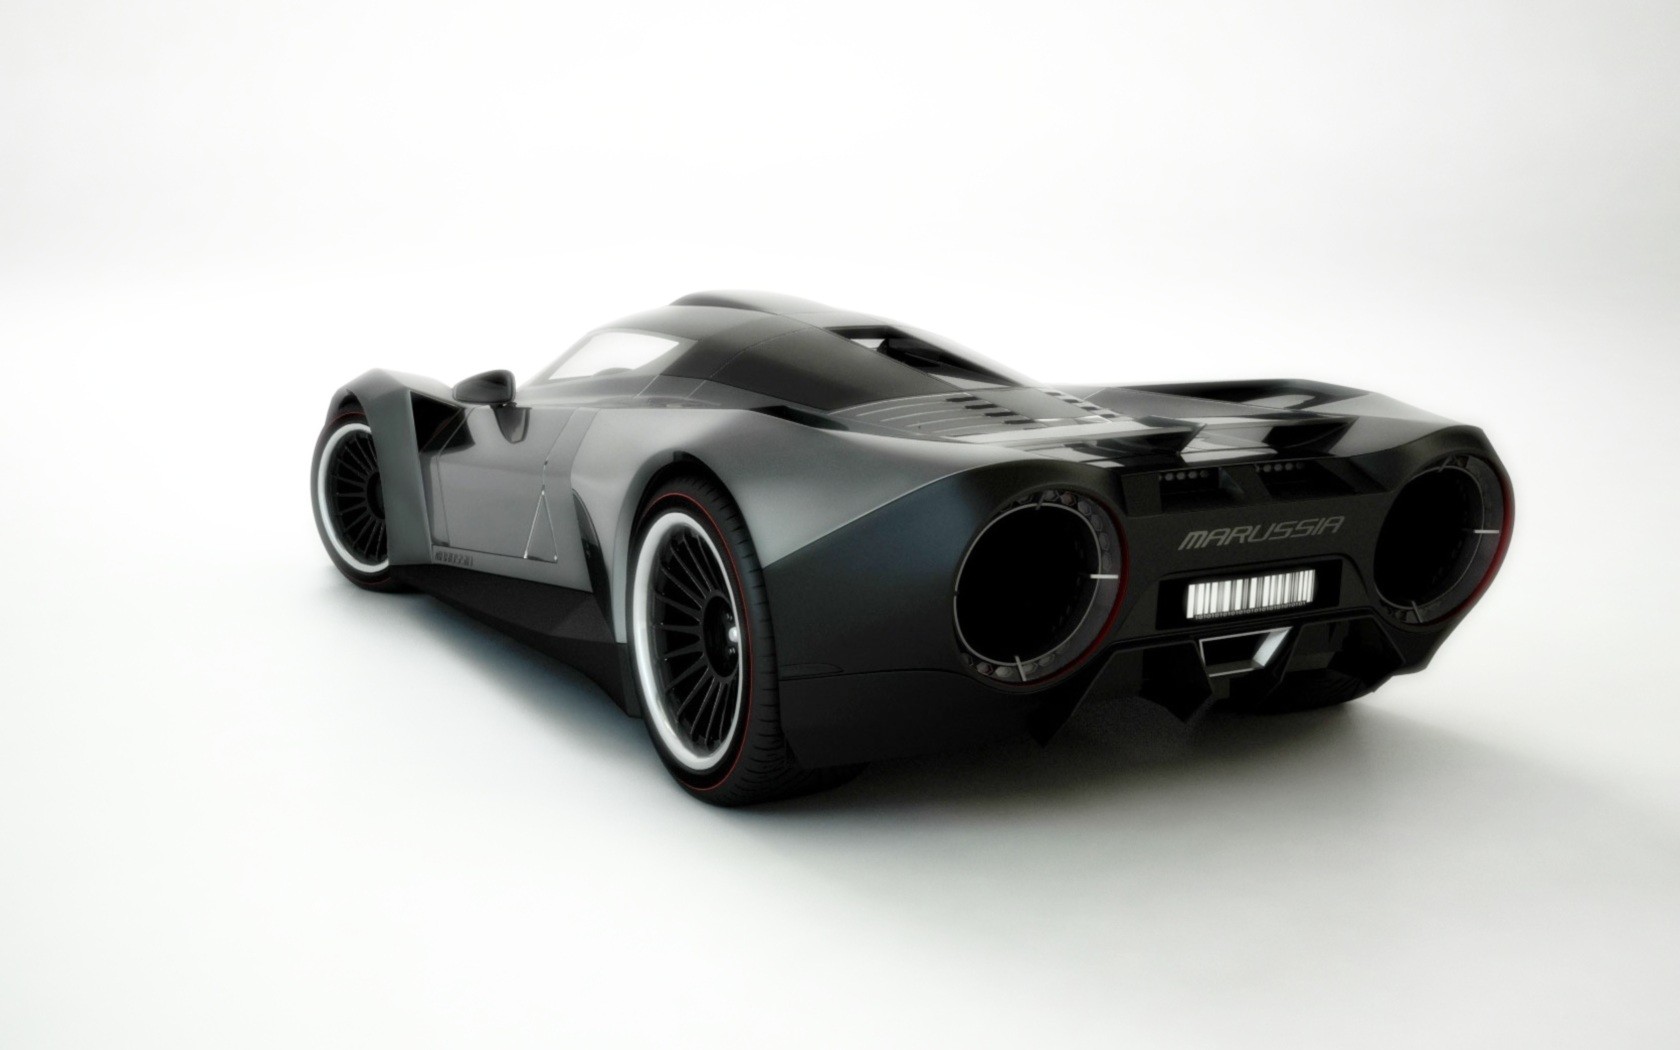 Car Marussia Simple Background White Background Black Cars Vehicle 1680x1050